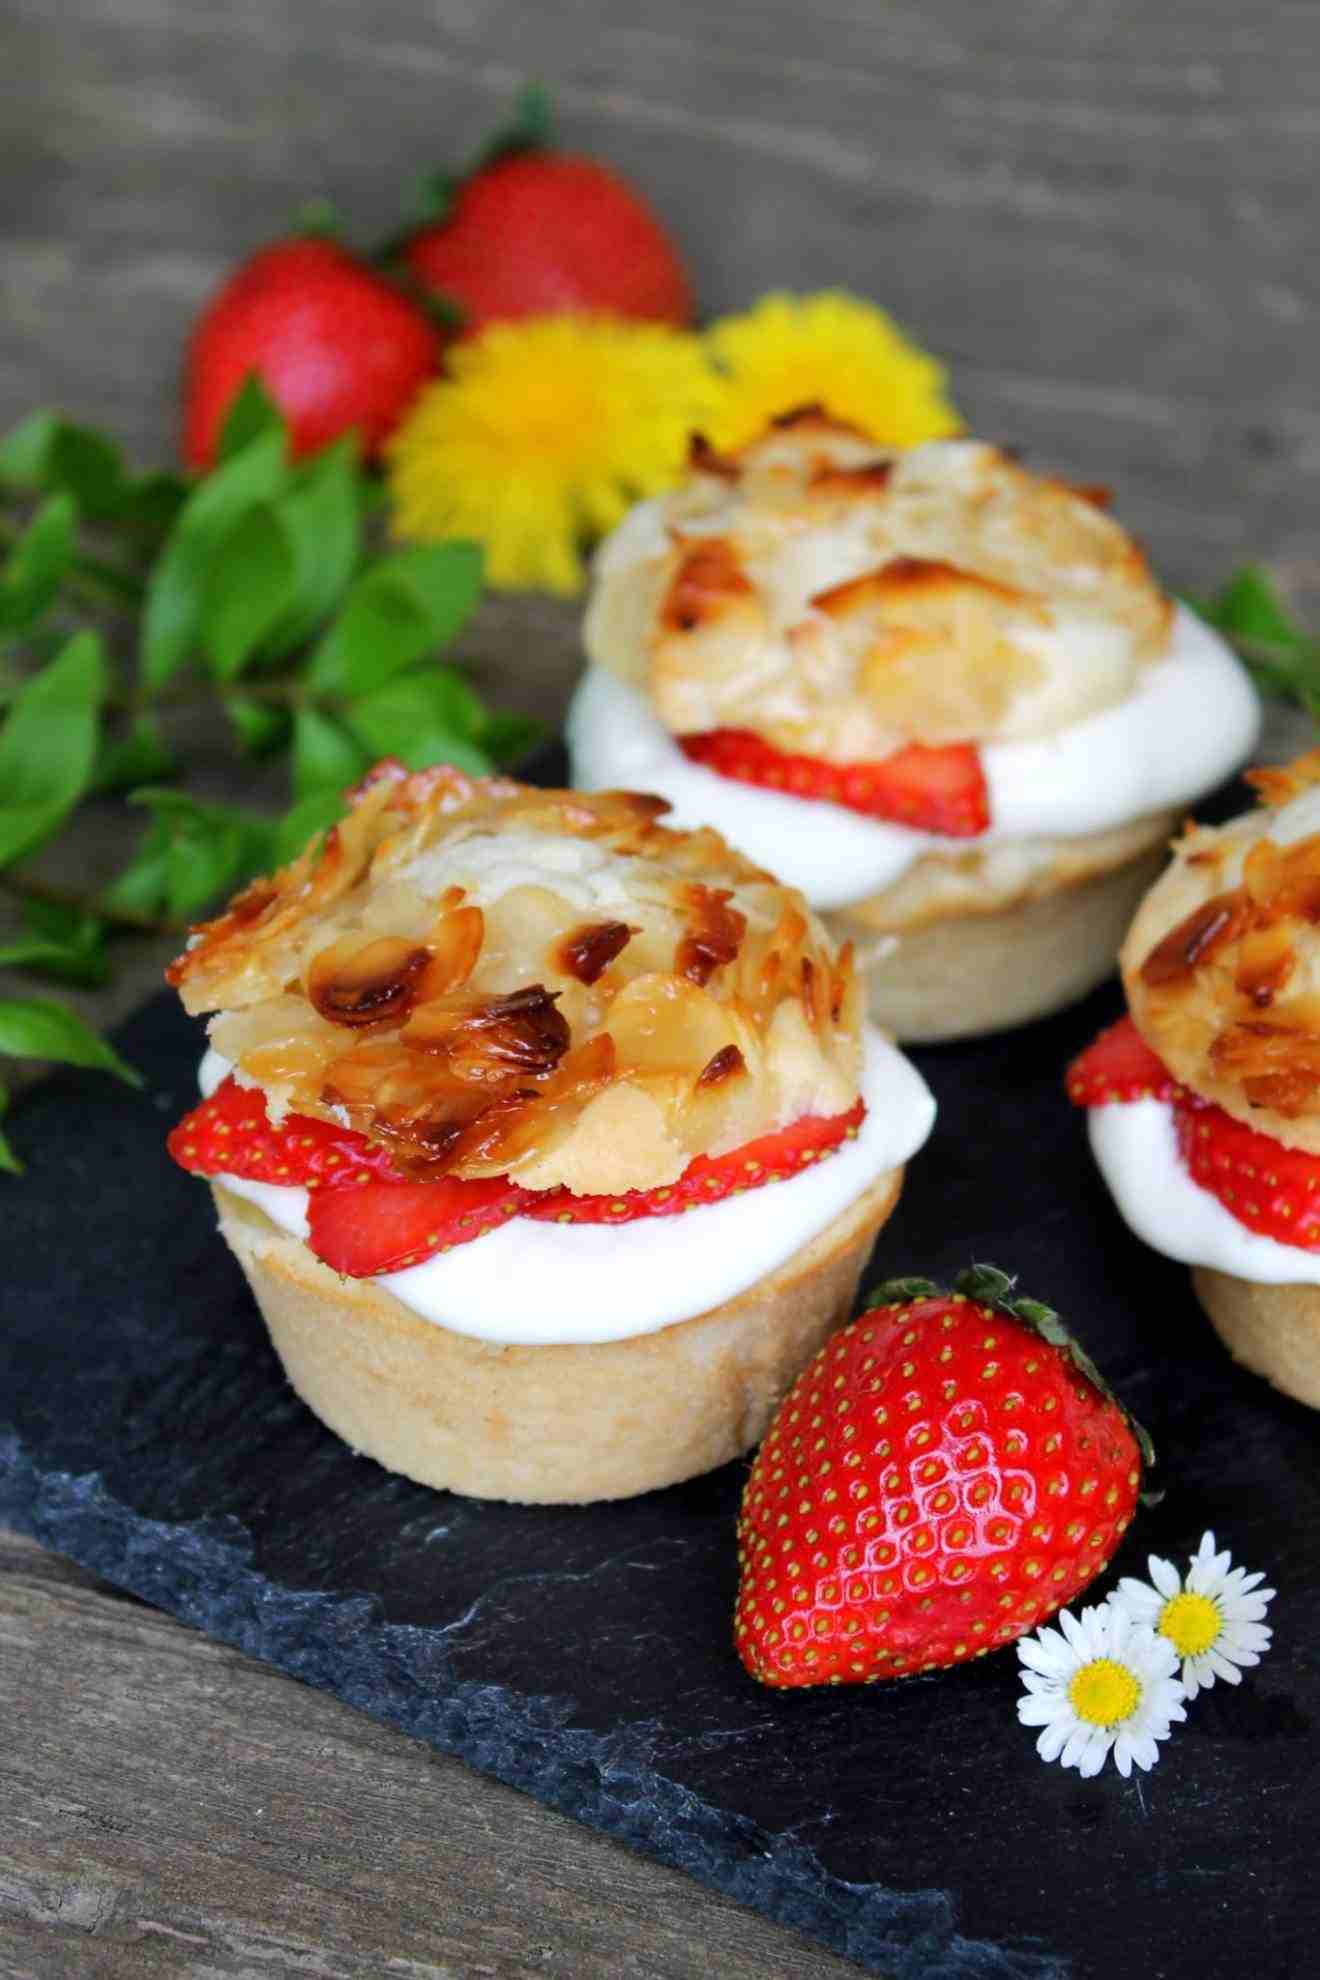 Bikinst with muffins and vanilla filling Low Carb night idea